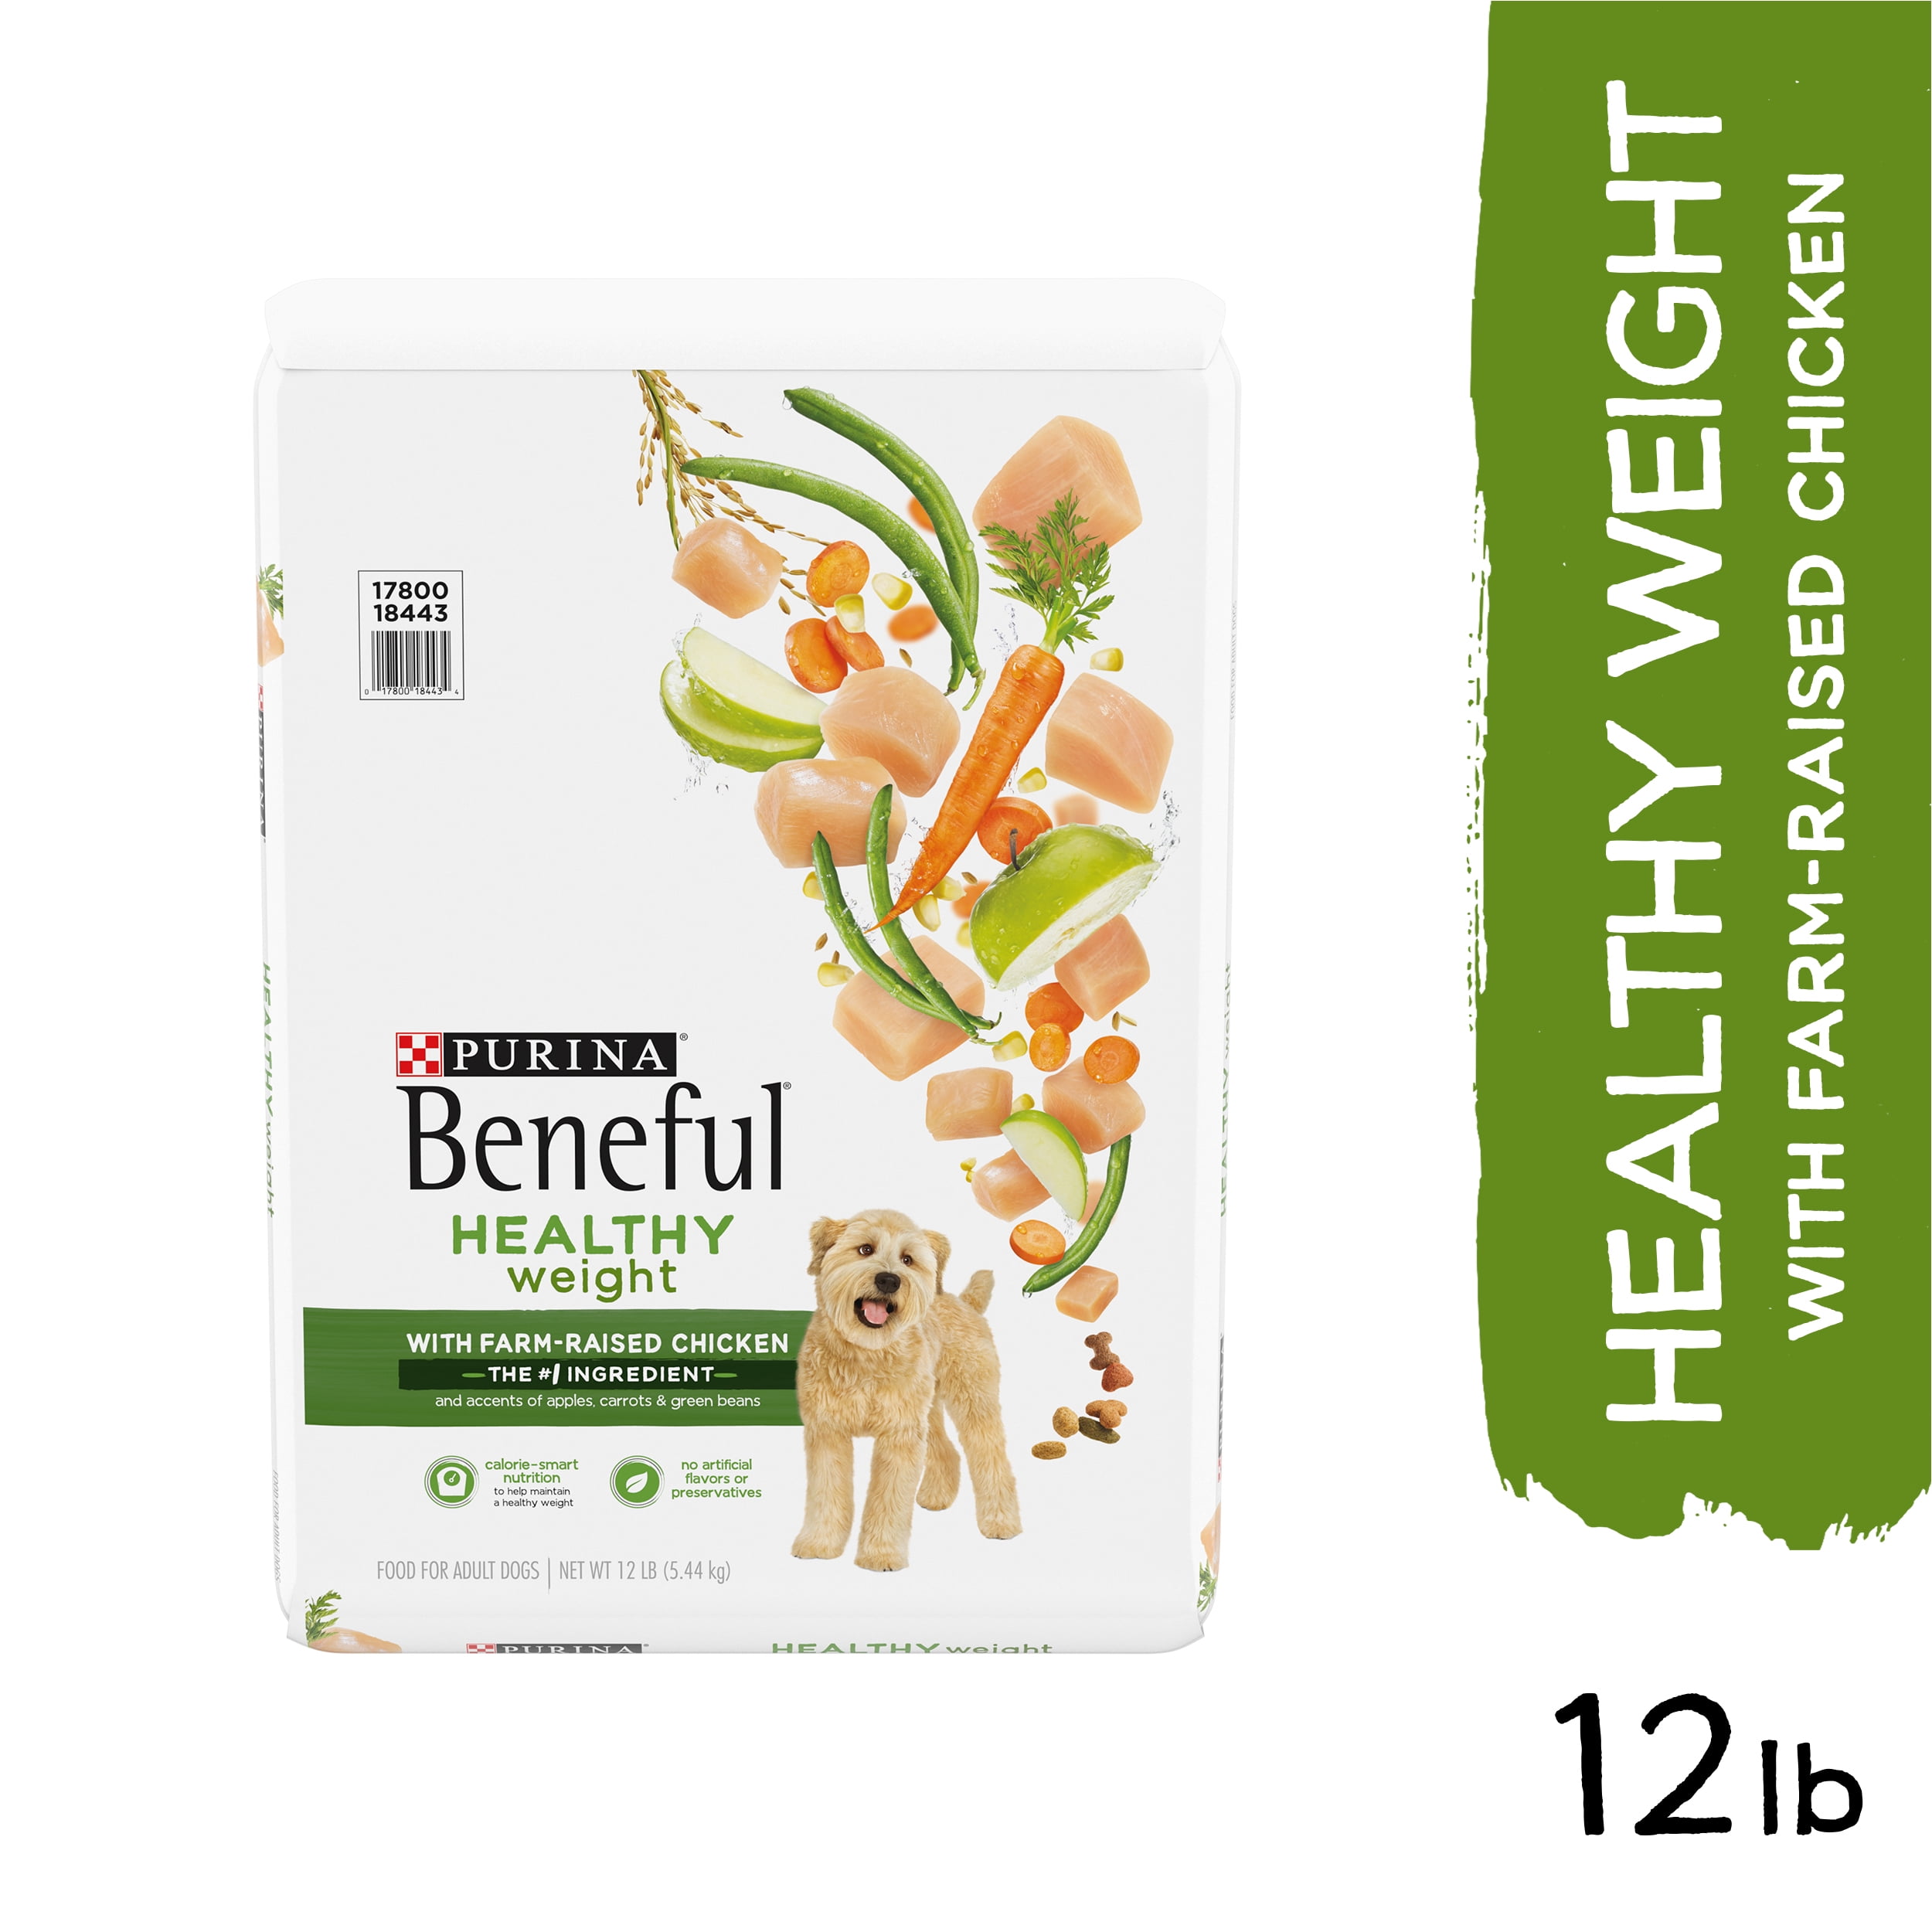 Purina Beneful Healthy Weight With Farm-Raised Chicken ...